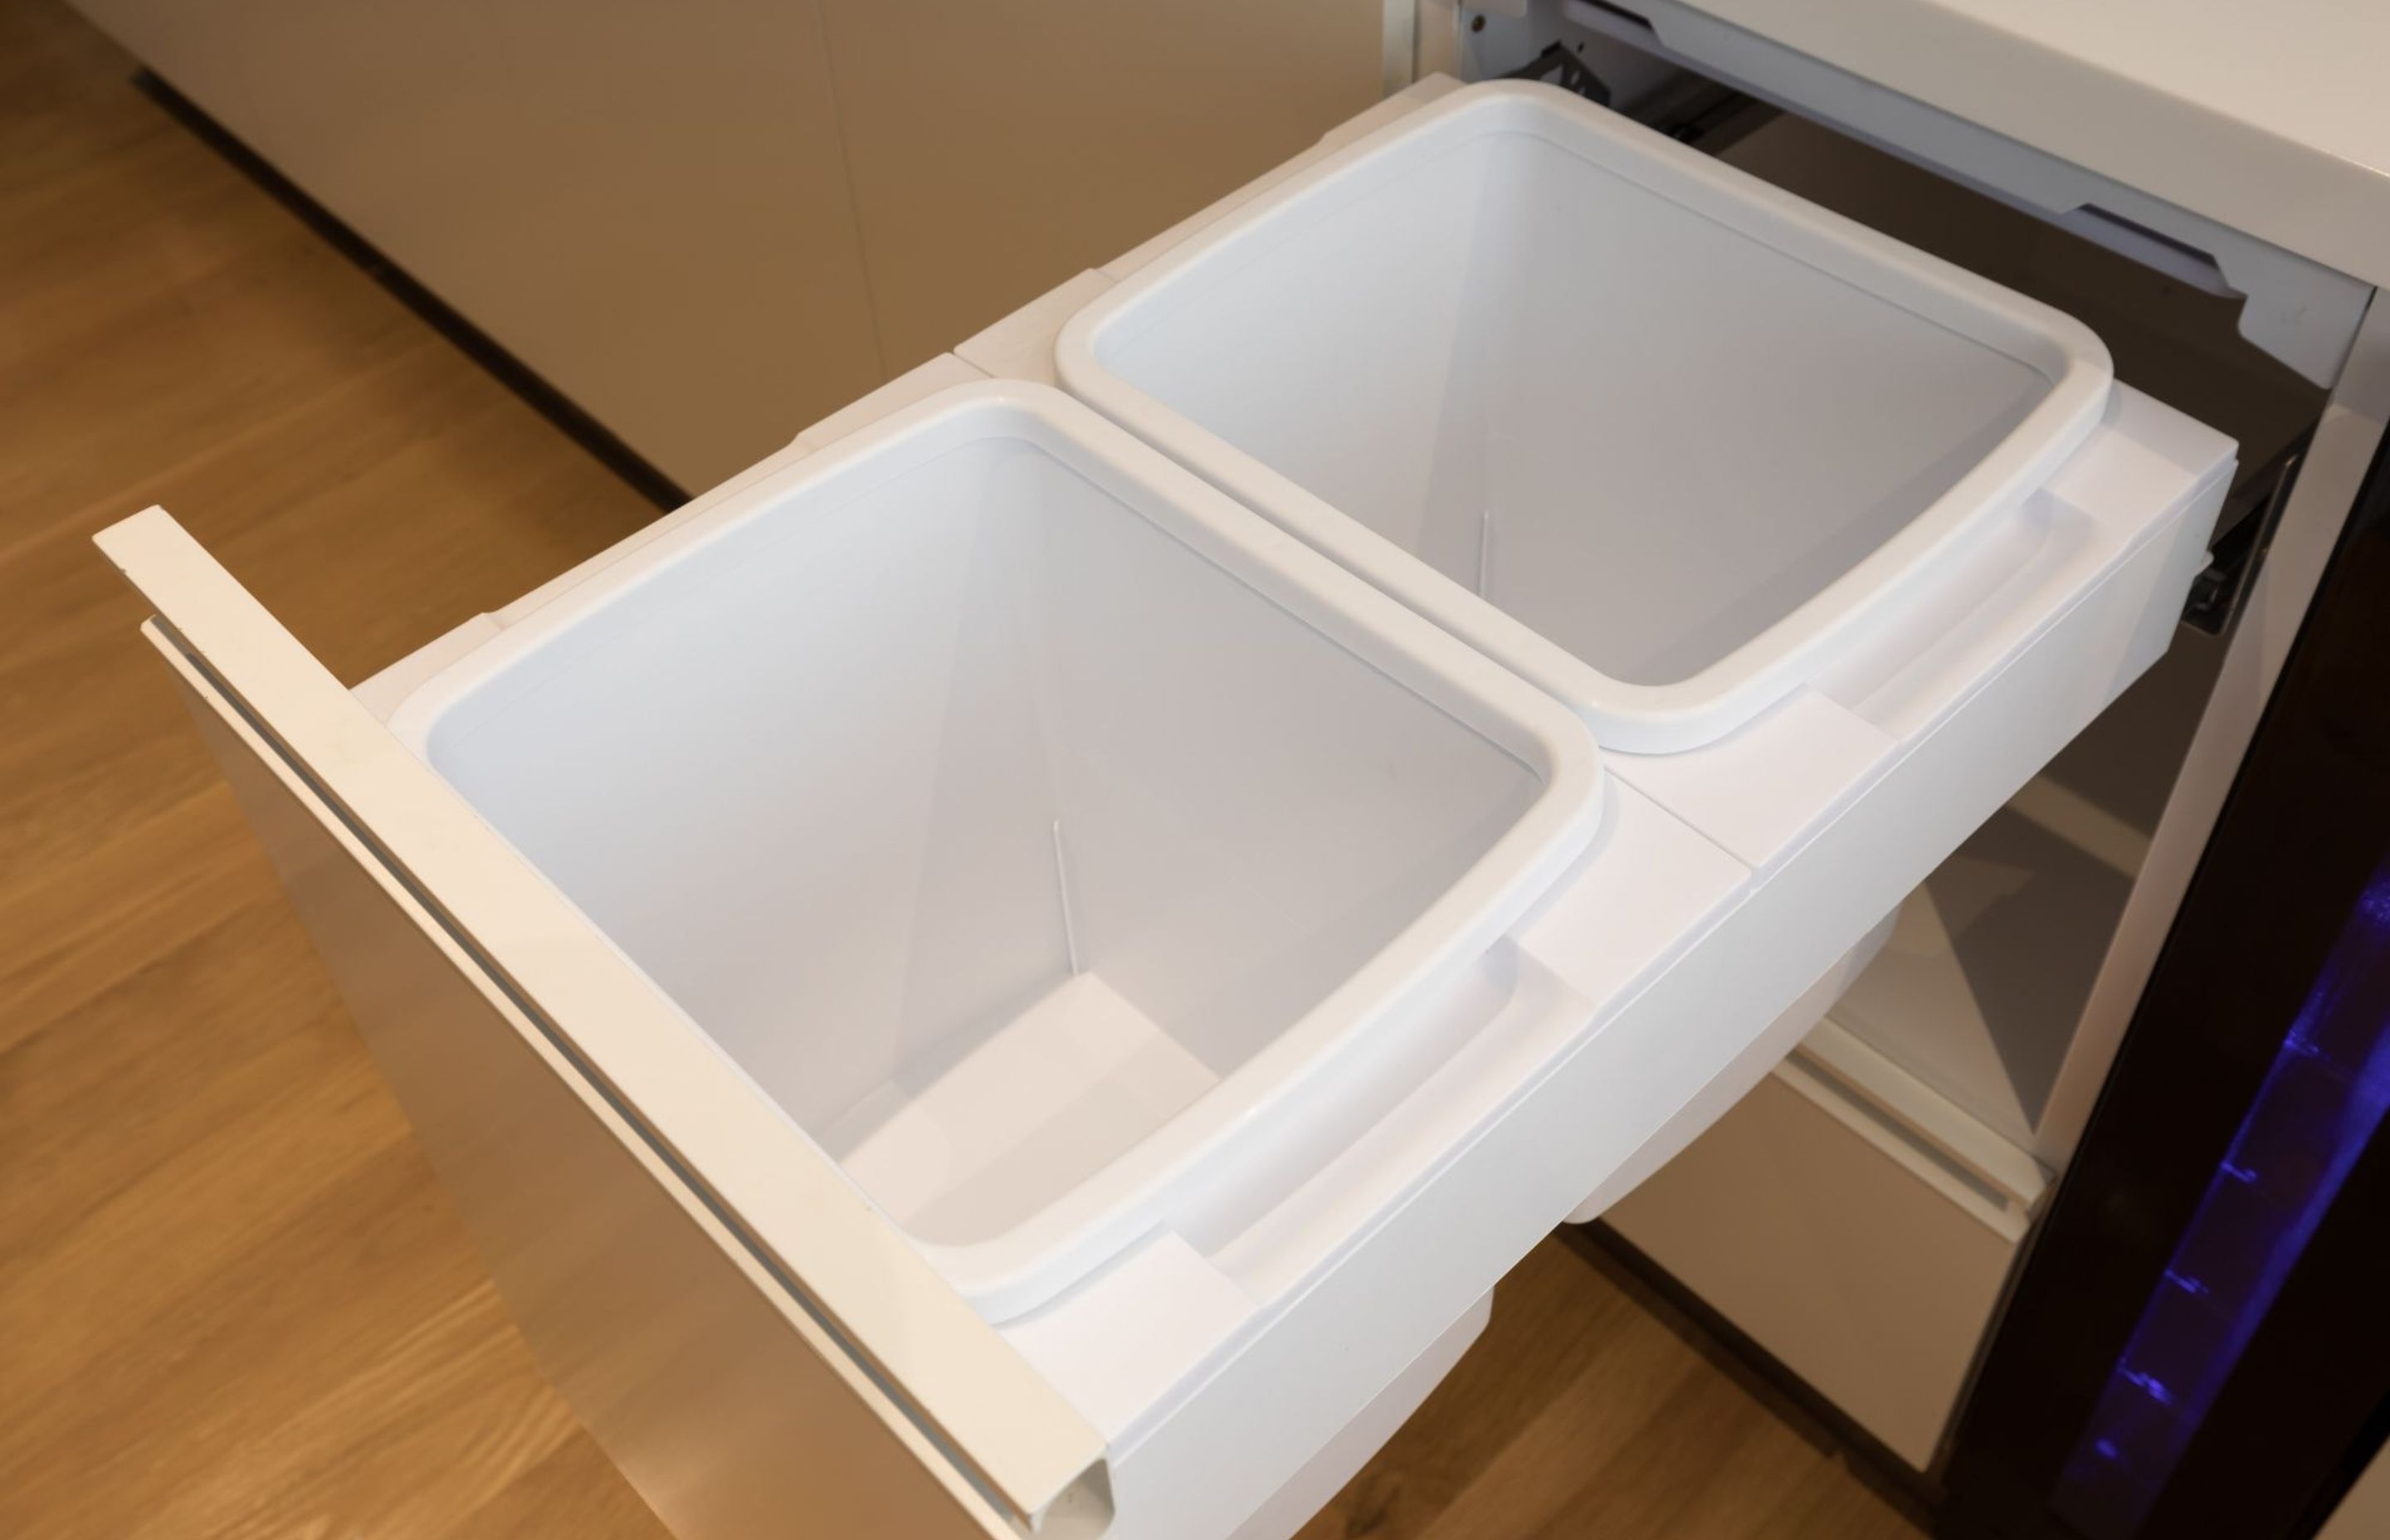 Concelo features "Clip'N'Clean" trays that can be easily removed for cleaning in warm soapy water.